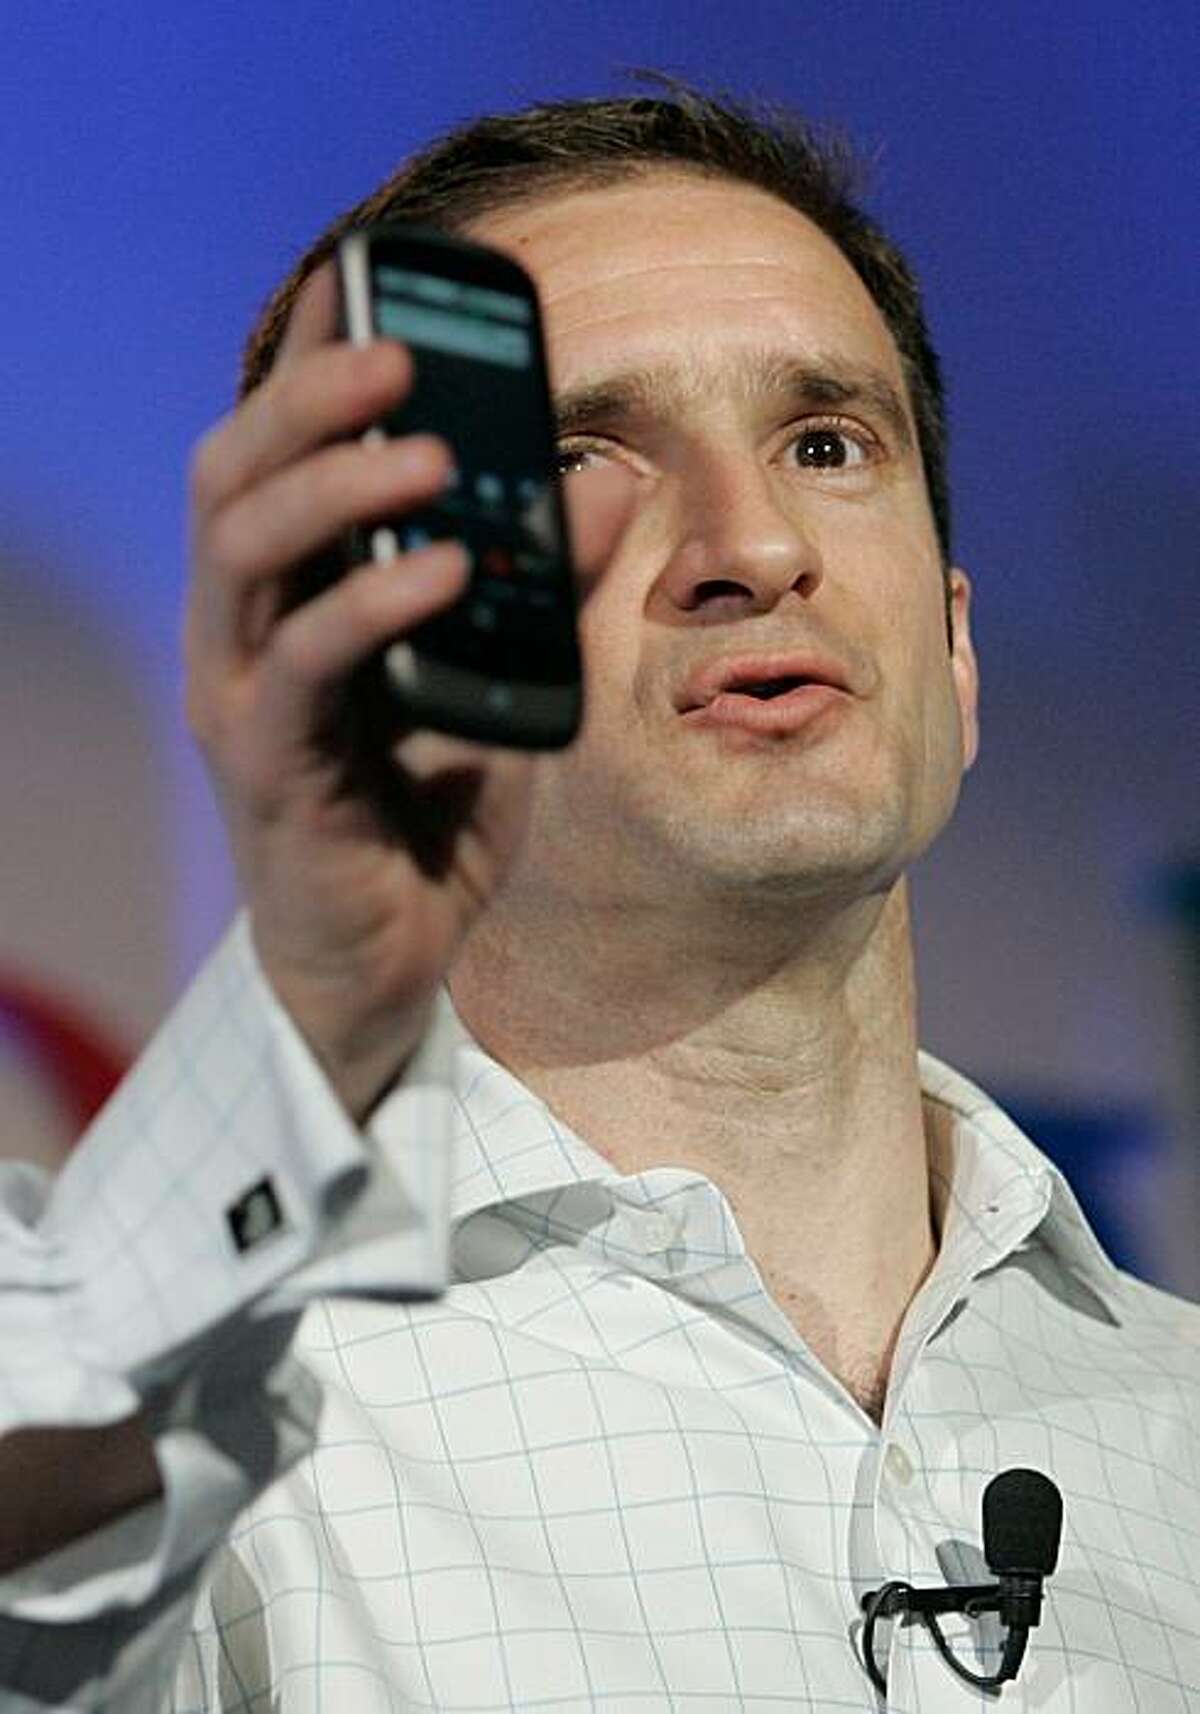 Mario Queiroz, Vice President of Product Management for Google, holds up the Nexus One smartphone running on the Google Android platform, the first mobile phone the internet company will sell directly to consumers, during a news conference at Google headquarters in Mountain View, California January 5, 2010. POOL/Robert Galbraith (Photo credit should read ROBERT GALBRAITH/AFP/Getty Images)